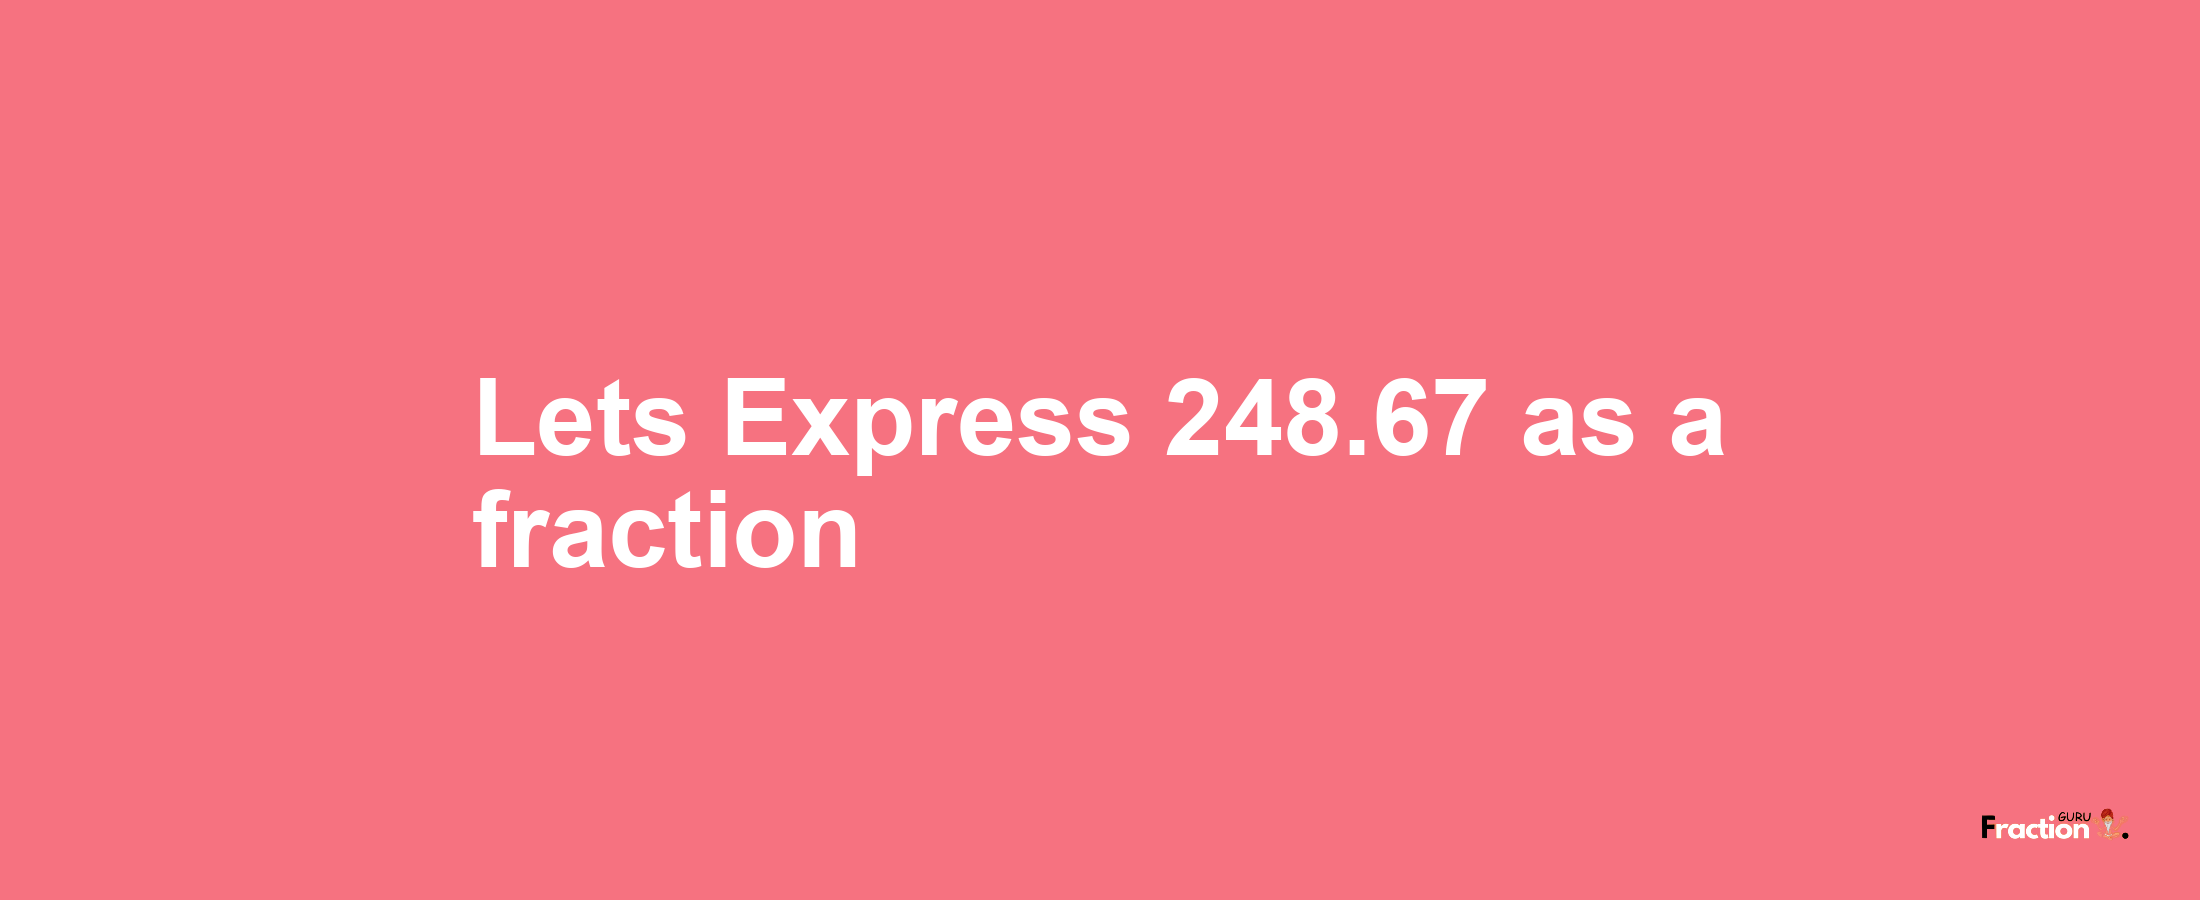 Lets Express 248.67 as afraction